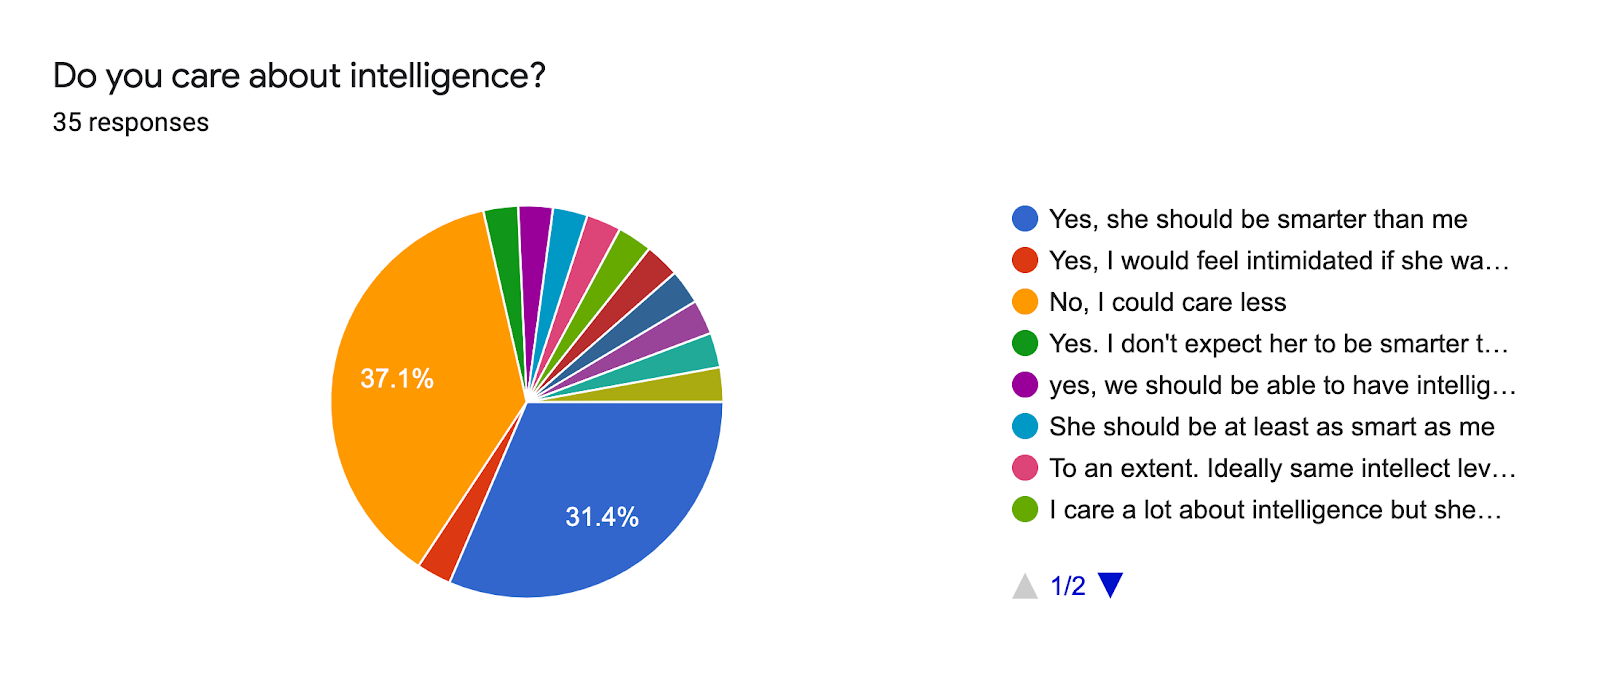 Forms response chart. Question title: Do you care about intelligence?. Number of responses: 35 responses.